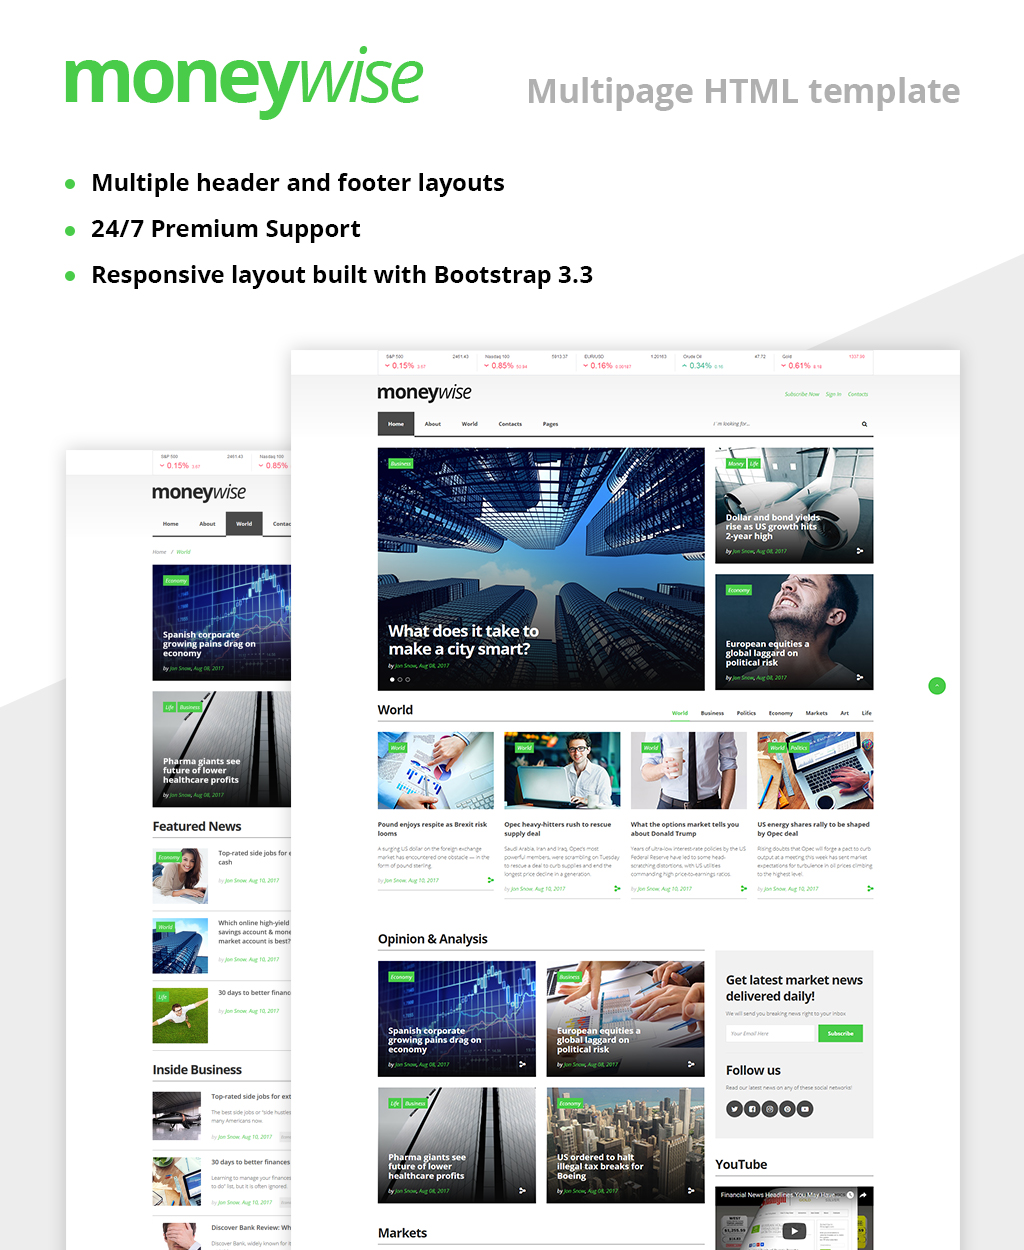 Moneywise - Financial News Magazine Responsive Multipage Website Template